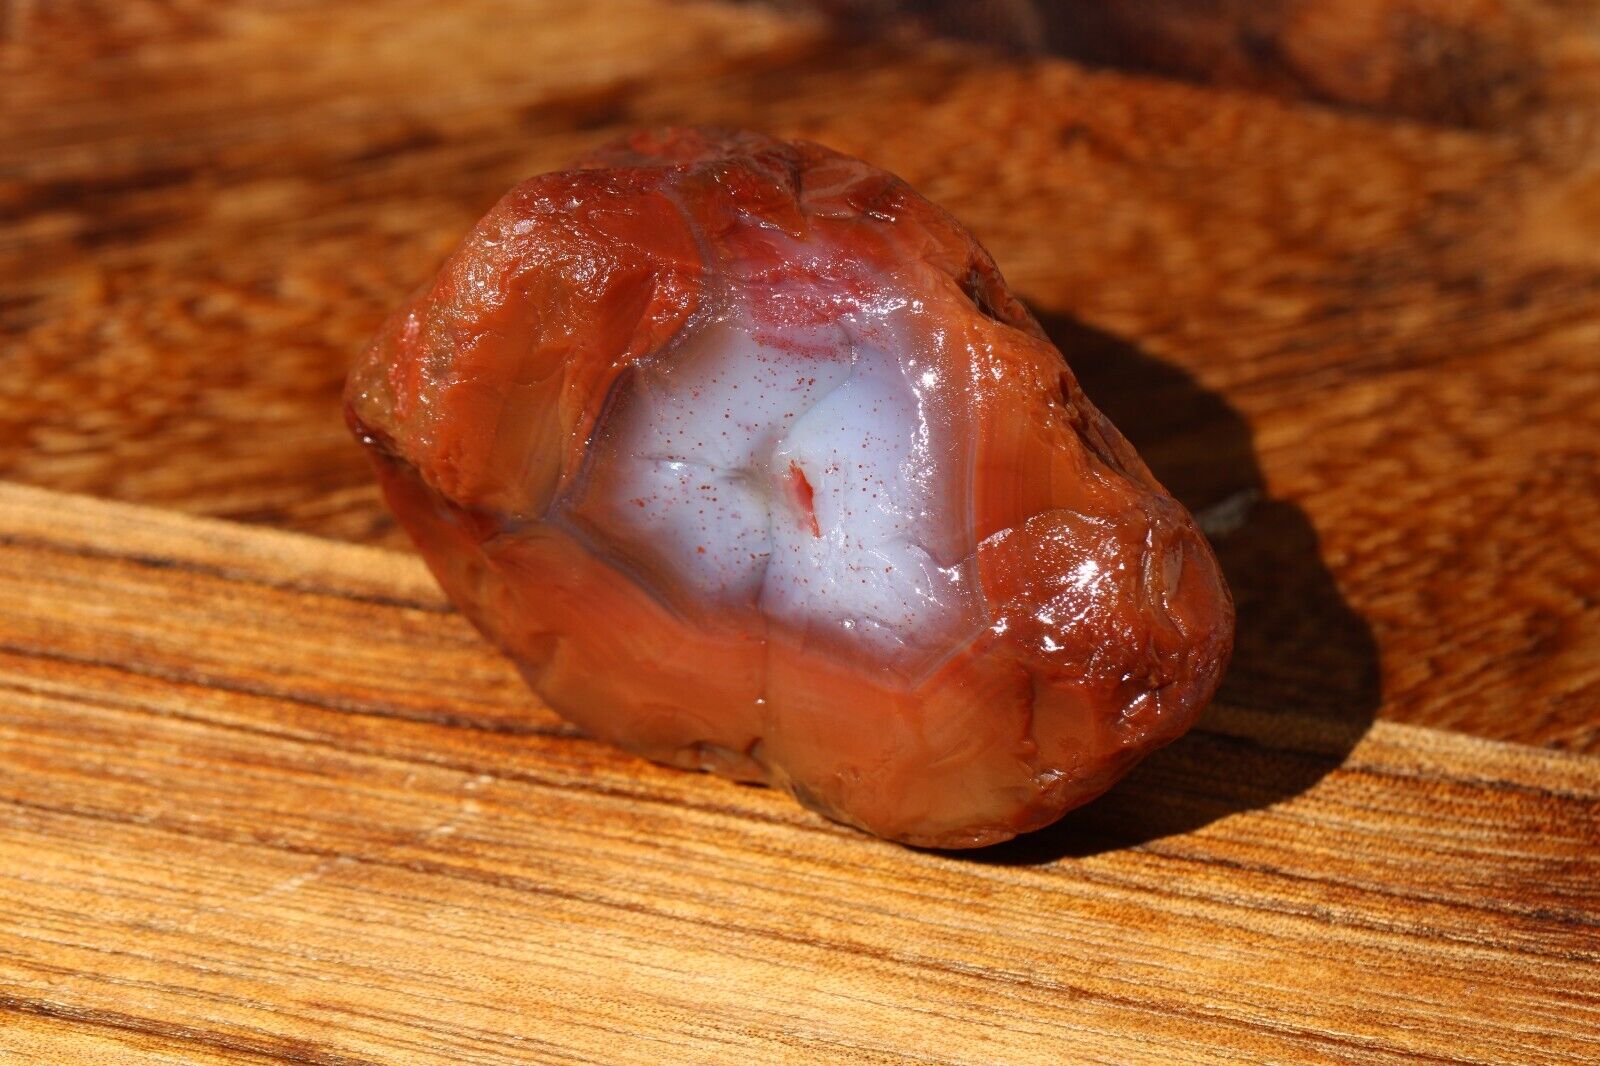 4.2oz Lake Superior Agate with a bright lavender jelly center and platelets